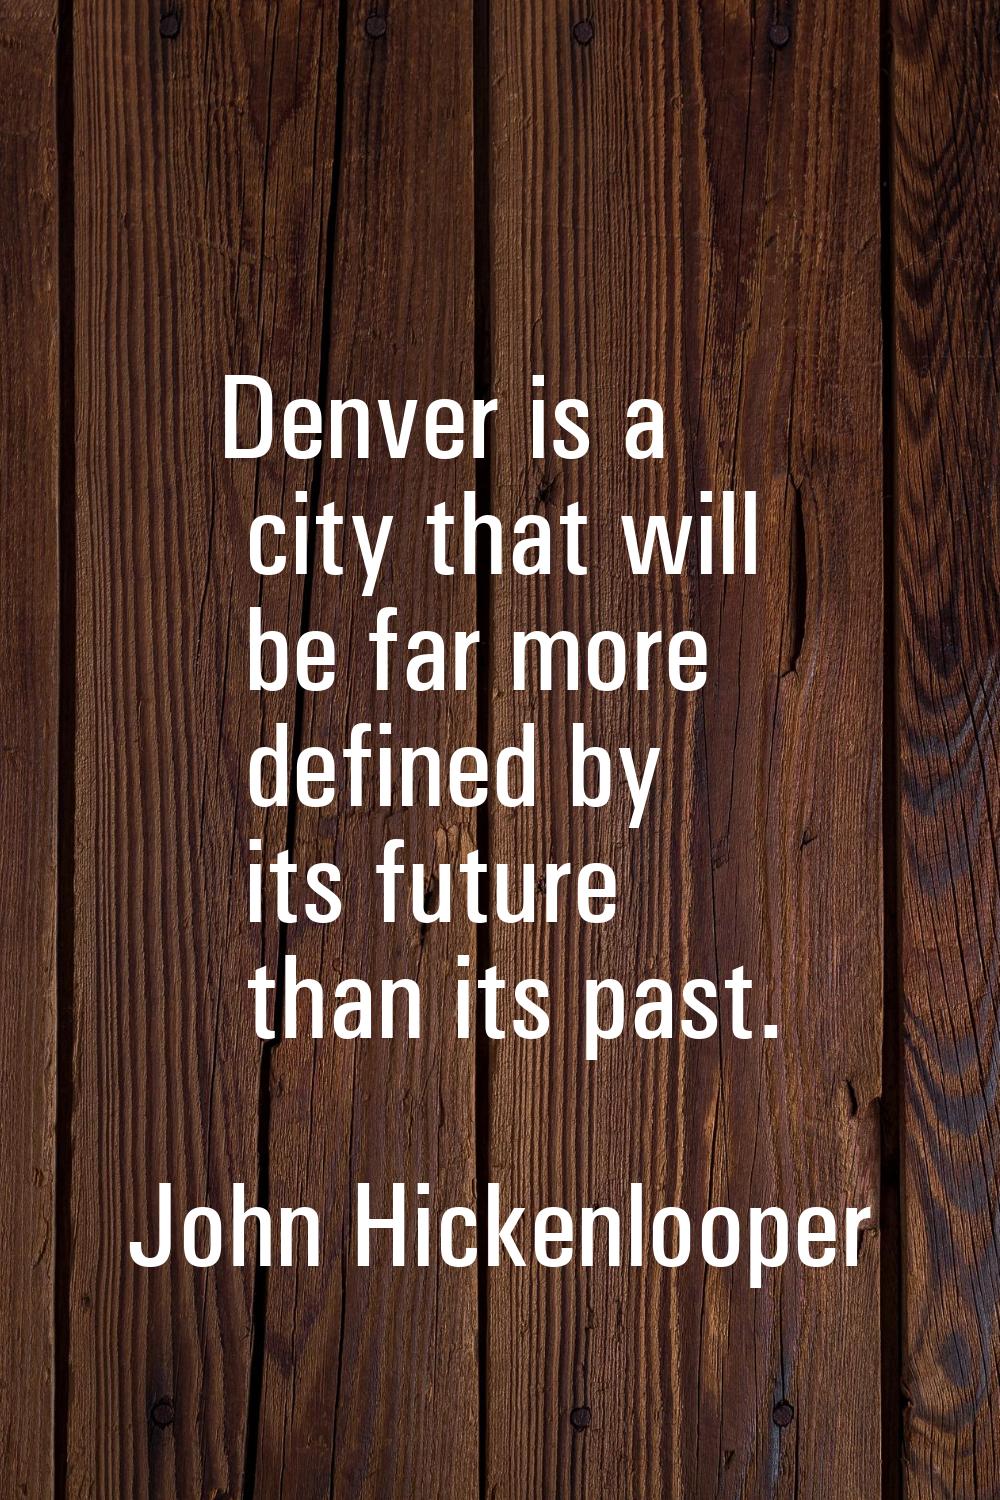 Denver is a city that will be far more defined by its future than its past.